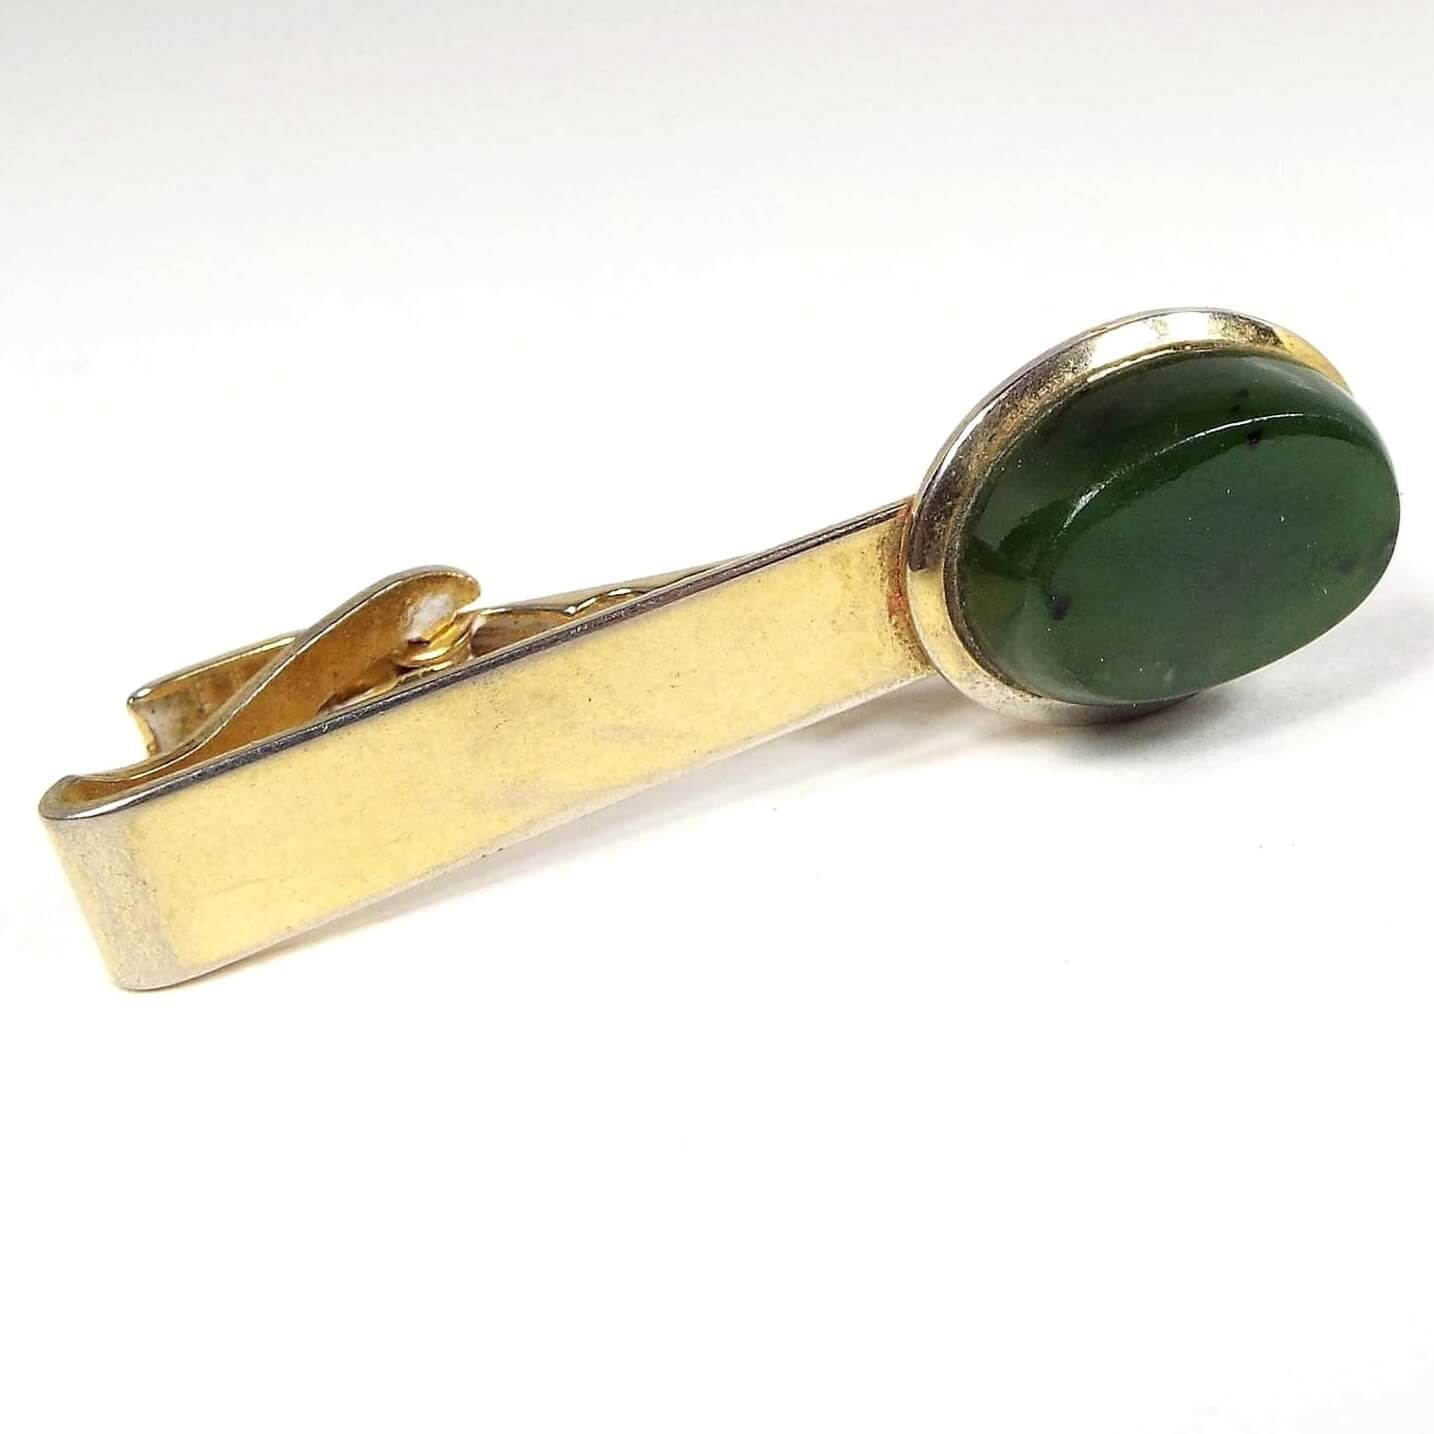 Front view of the retro vintage jade tie clip. The metal is gold tone in color. There is some rub wear at the end where some of the lighter base color is showing through from age. The other end has a thick oval jade gemstone cab that is dark green with a few darker color spots.